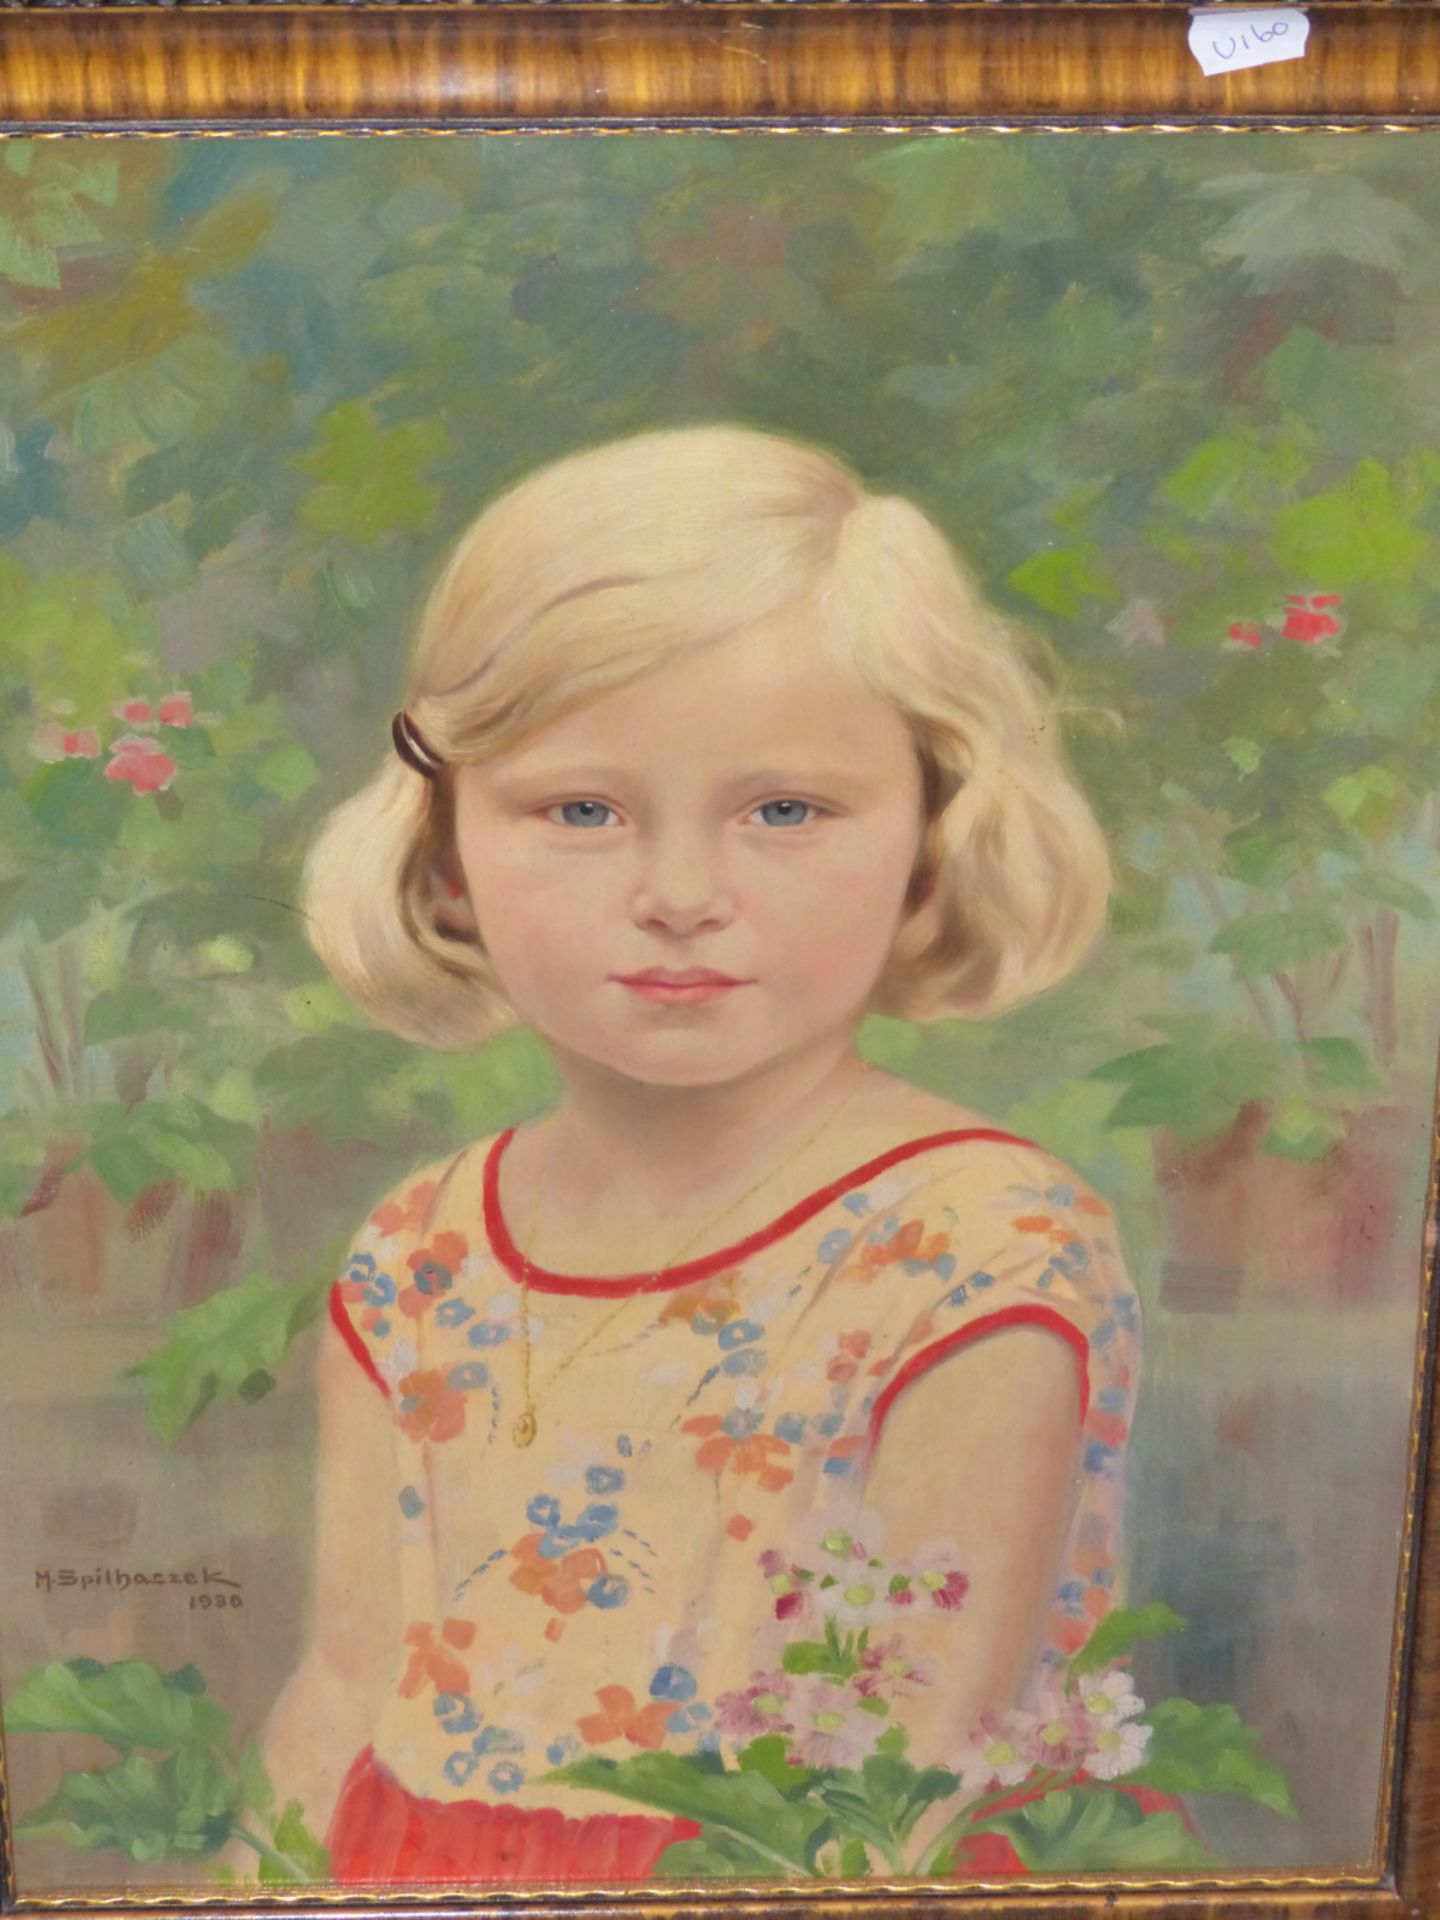 M. SPILHACZEK (1876-1961) ARR. PORTRAIT OF A YOUNG GIRL, SIGNED AND DATED 1930, OIL ON BOARD. 49 x - Image 2 of 8